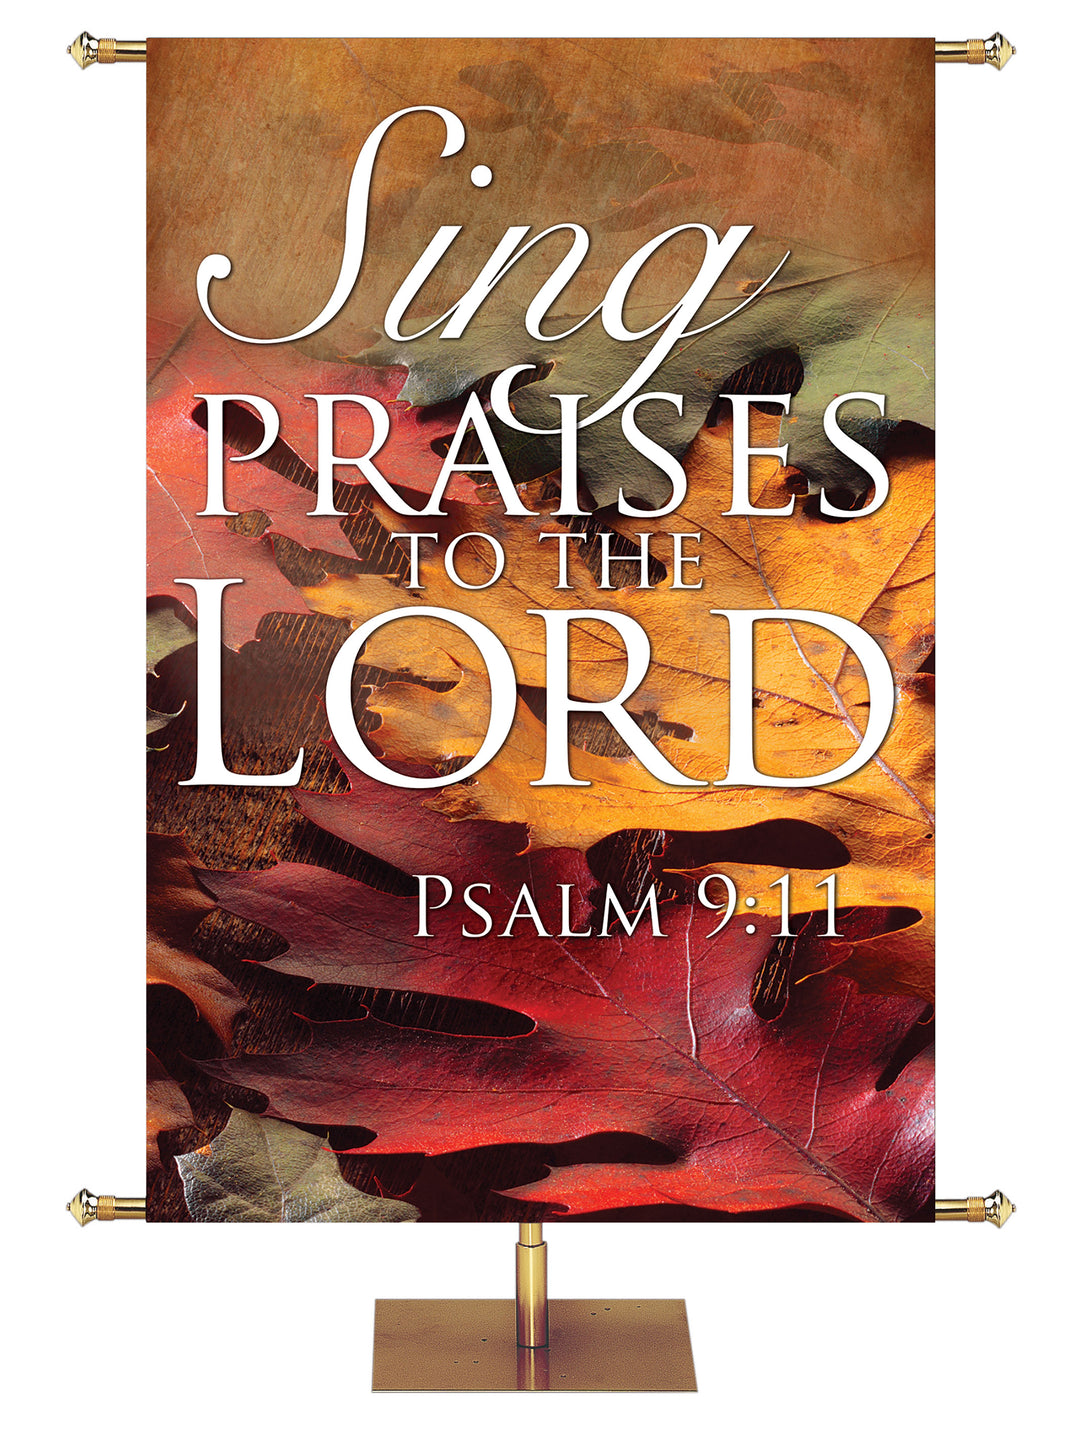 Sing Praises to the Lord Design 4 Psalm 9:11 Church Banner for Fall and Thanksgiving with Autumn leaves